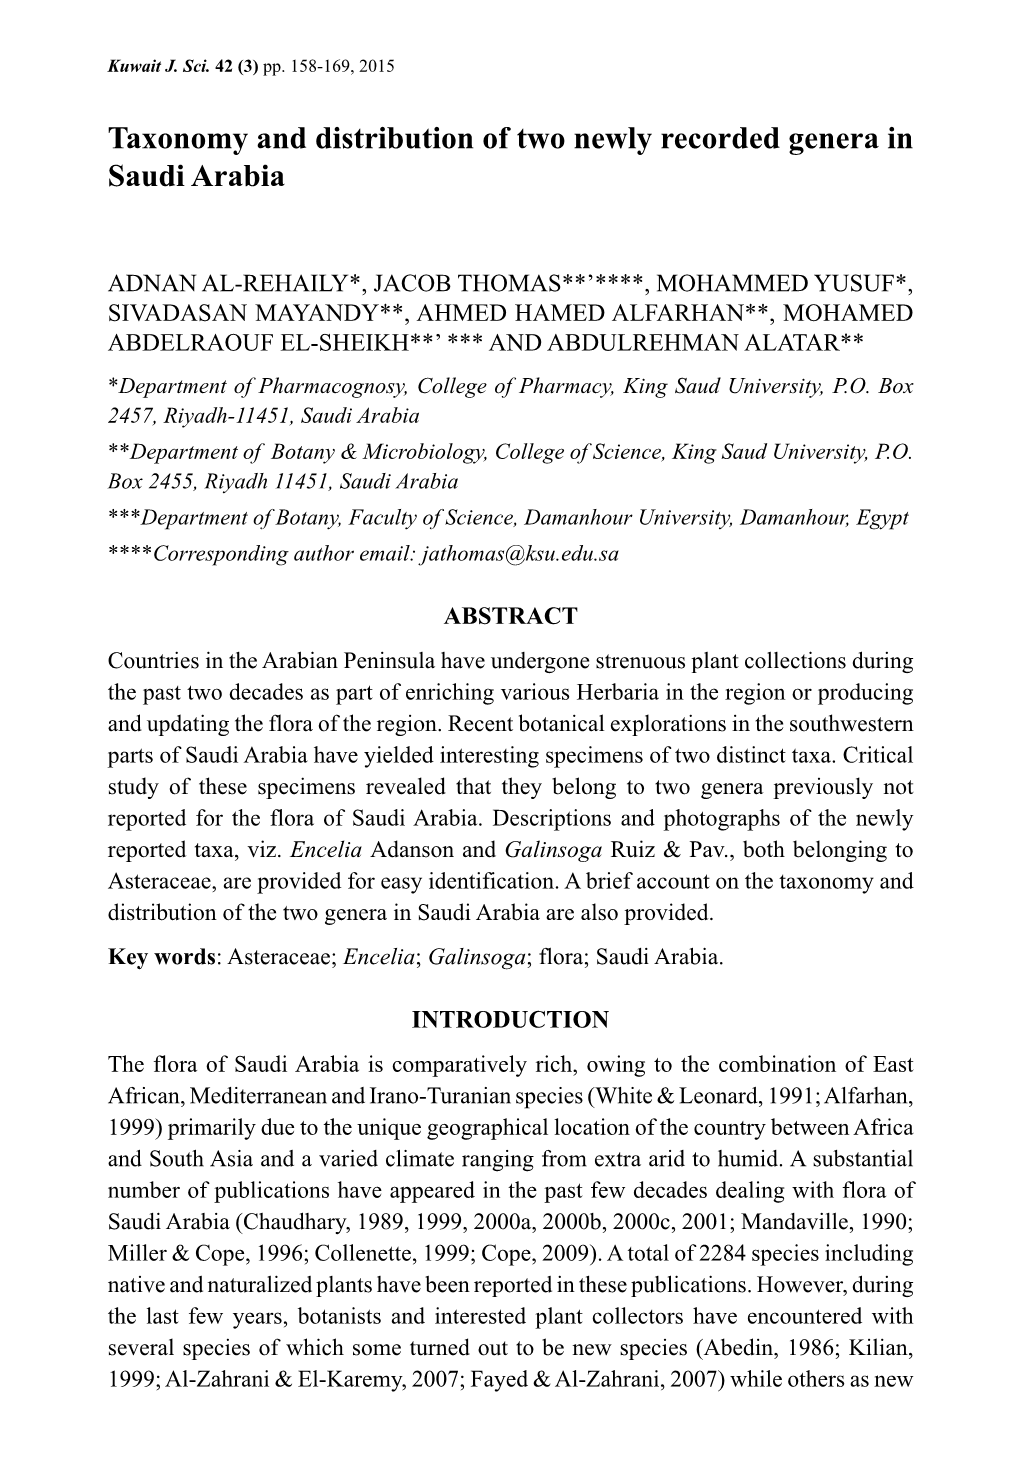 Taxonomy and Distribution of Two Newly Recorded Genera in Saudi Arabia